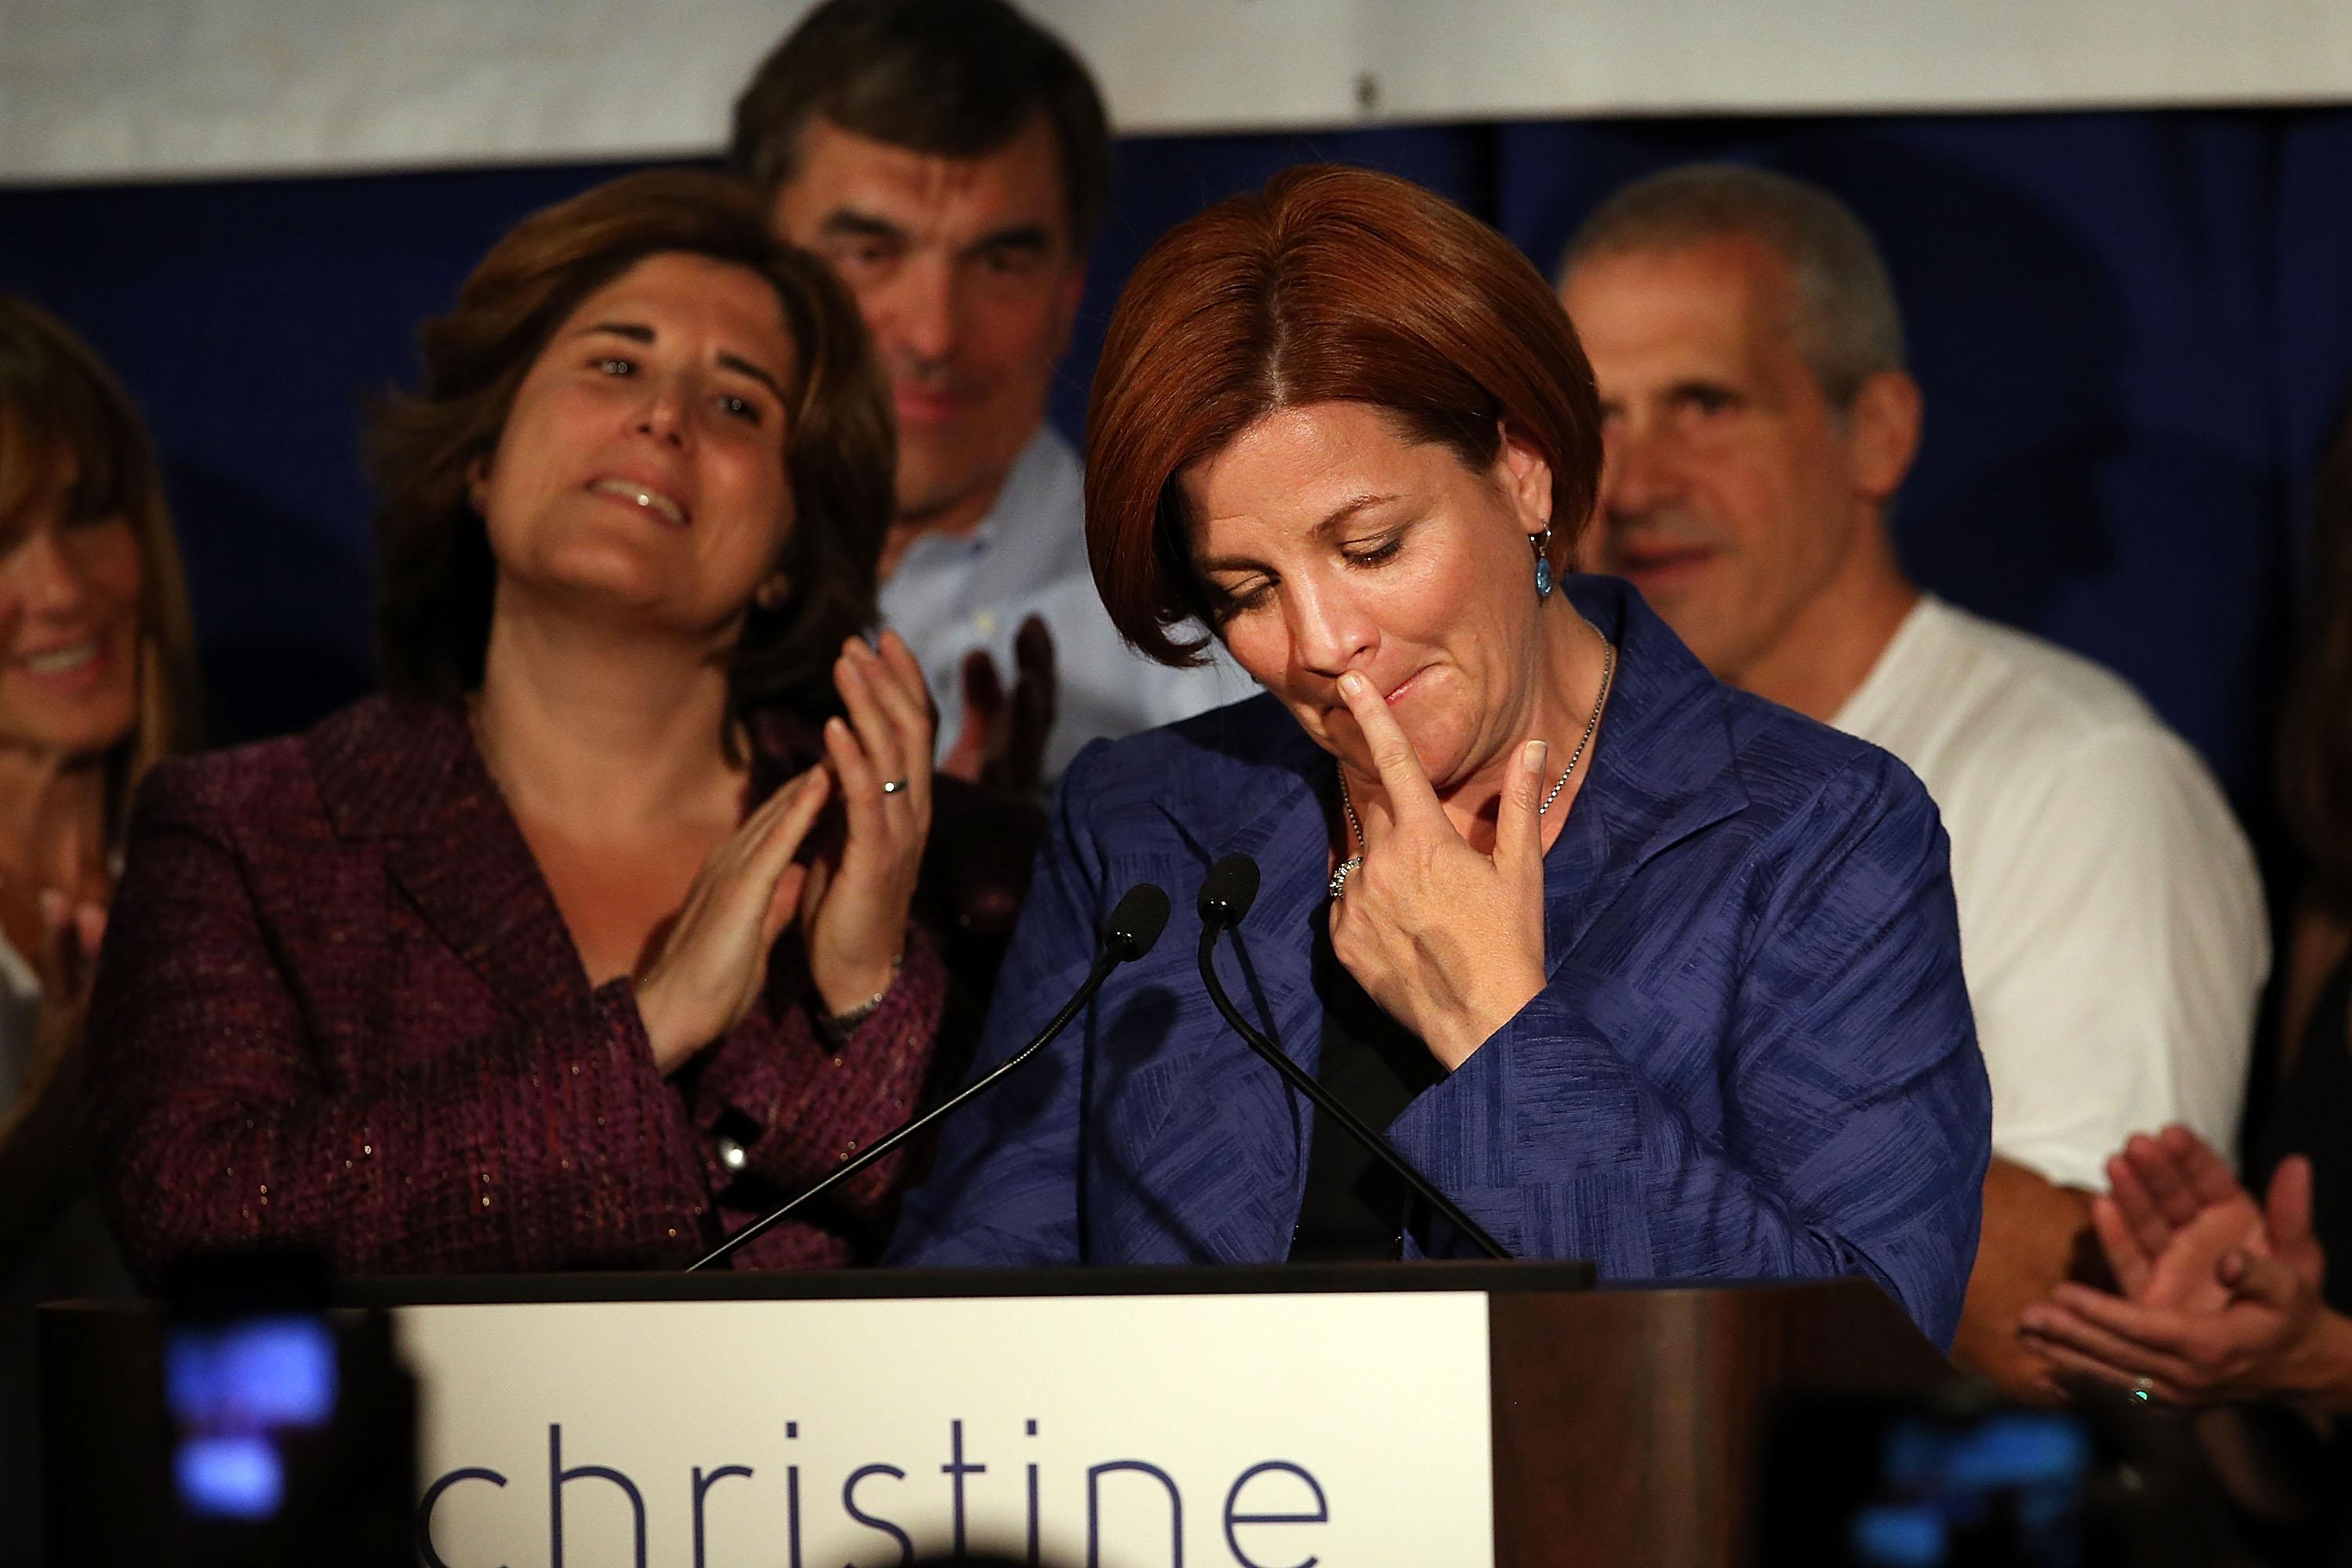 New York City Council Speaker Christine Quinn makes her concession speech. Her wife, Kim Catullo, is on her left.